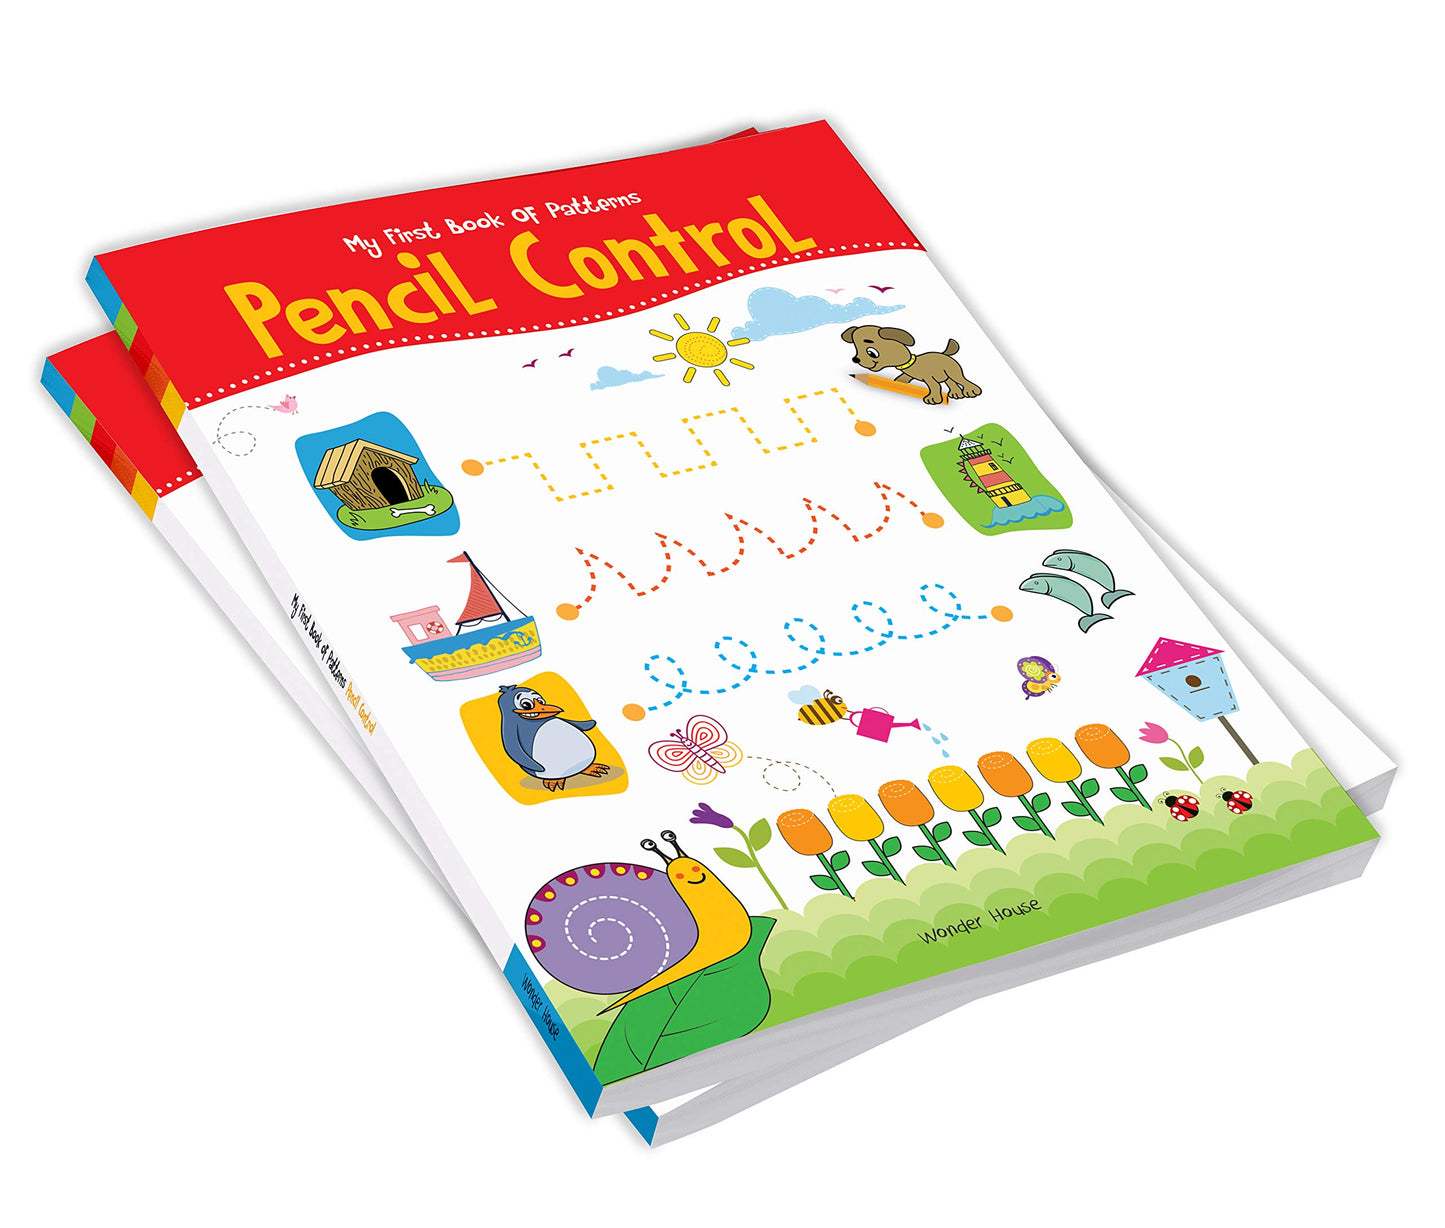 My First Book of Patterns Pencil Control: Practice Patterns (Pattern Writing) Paperback